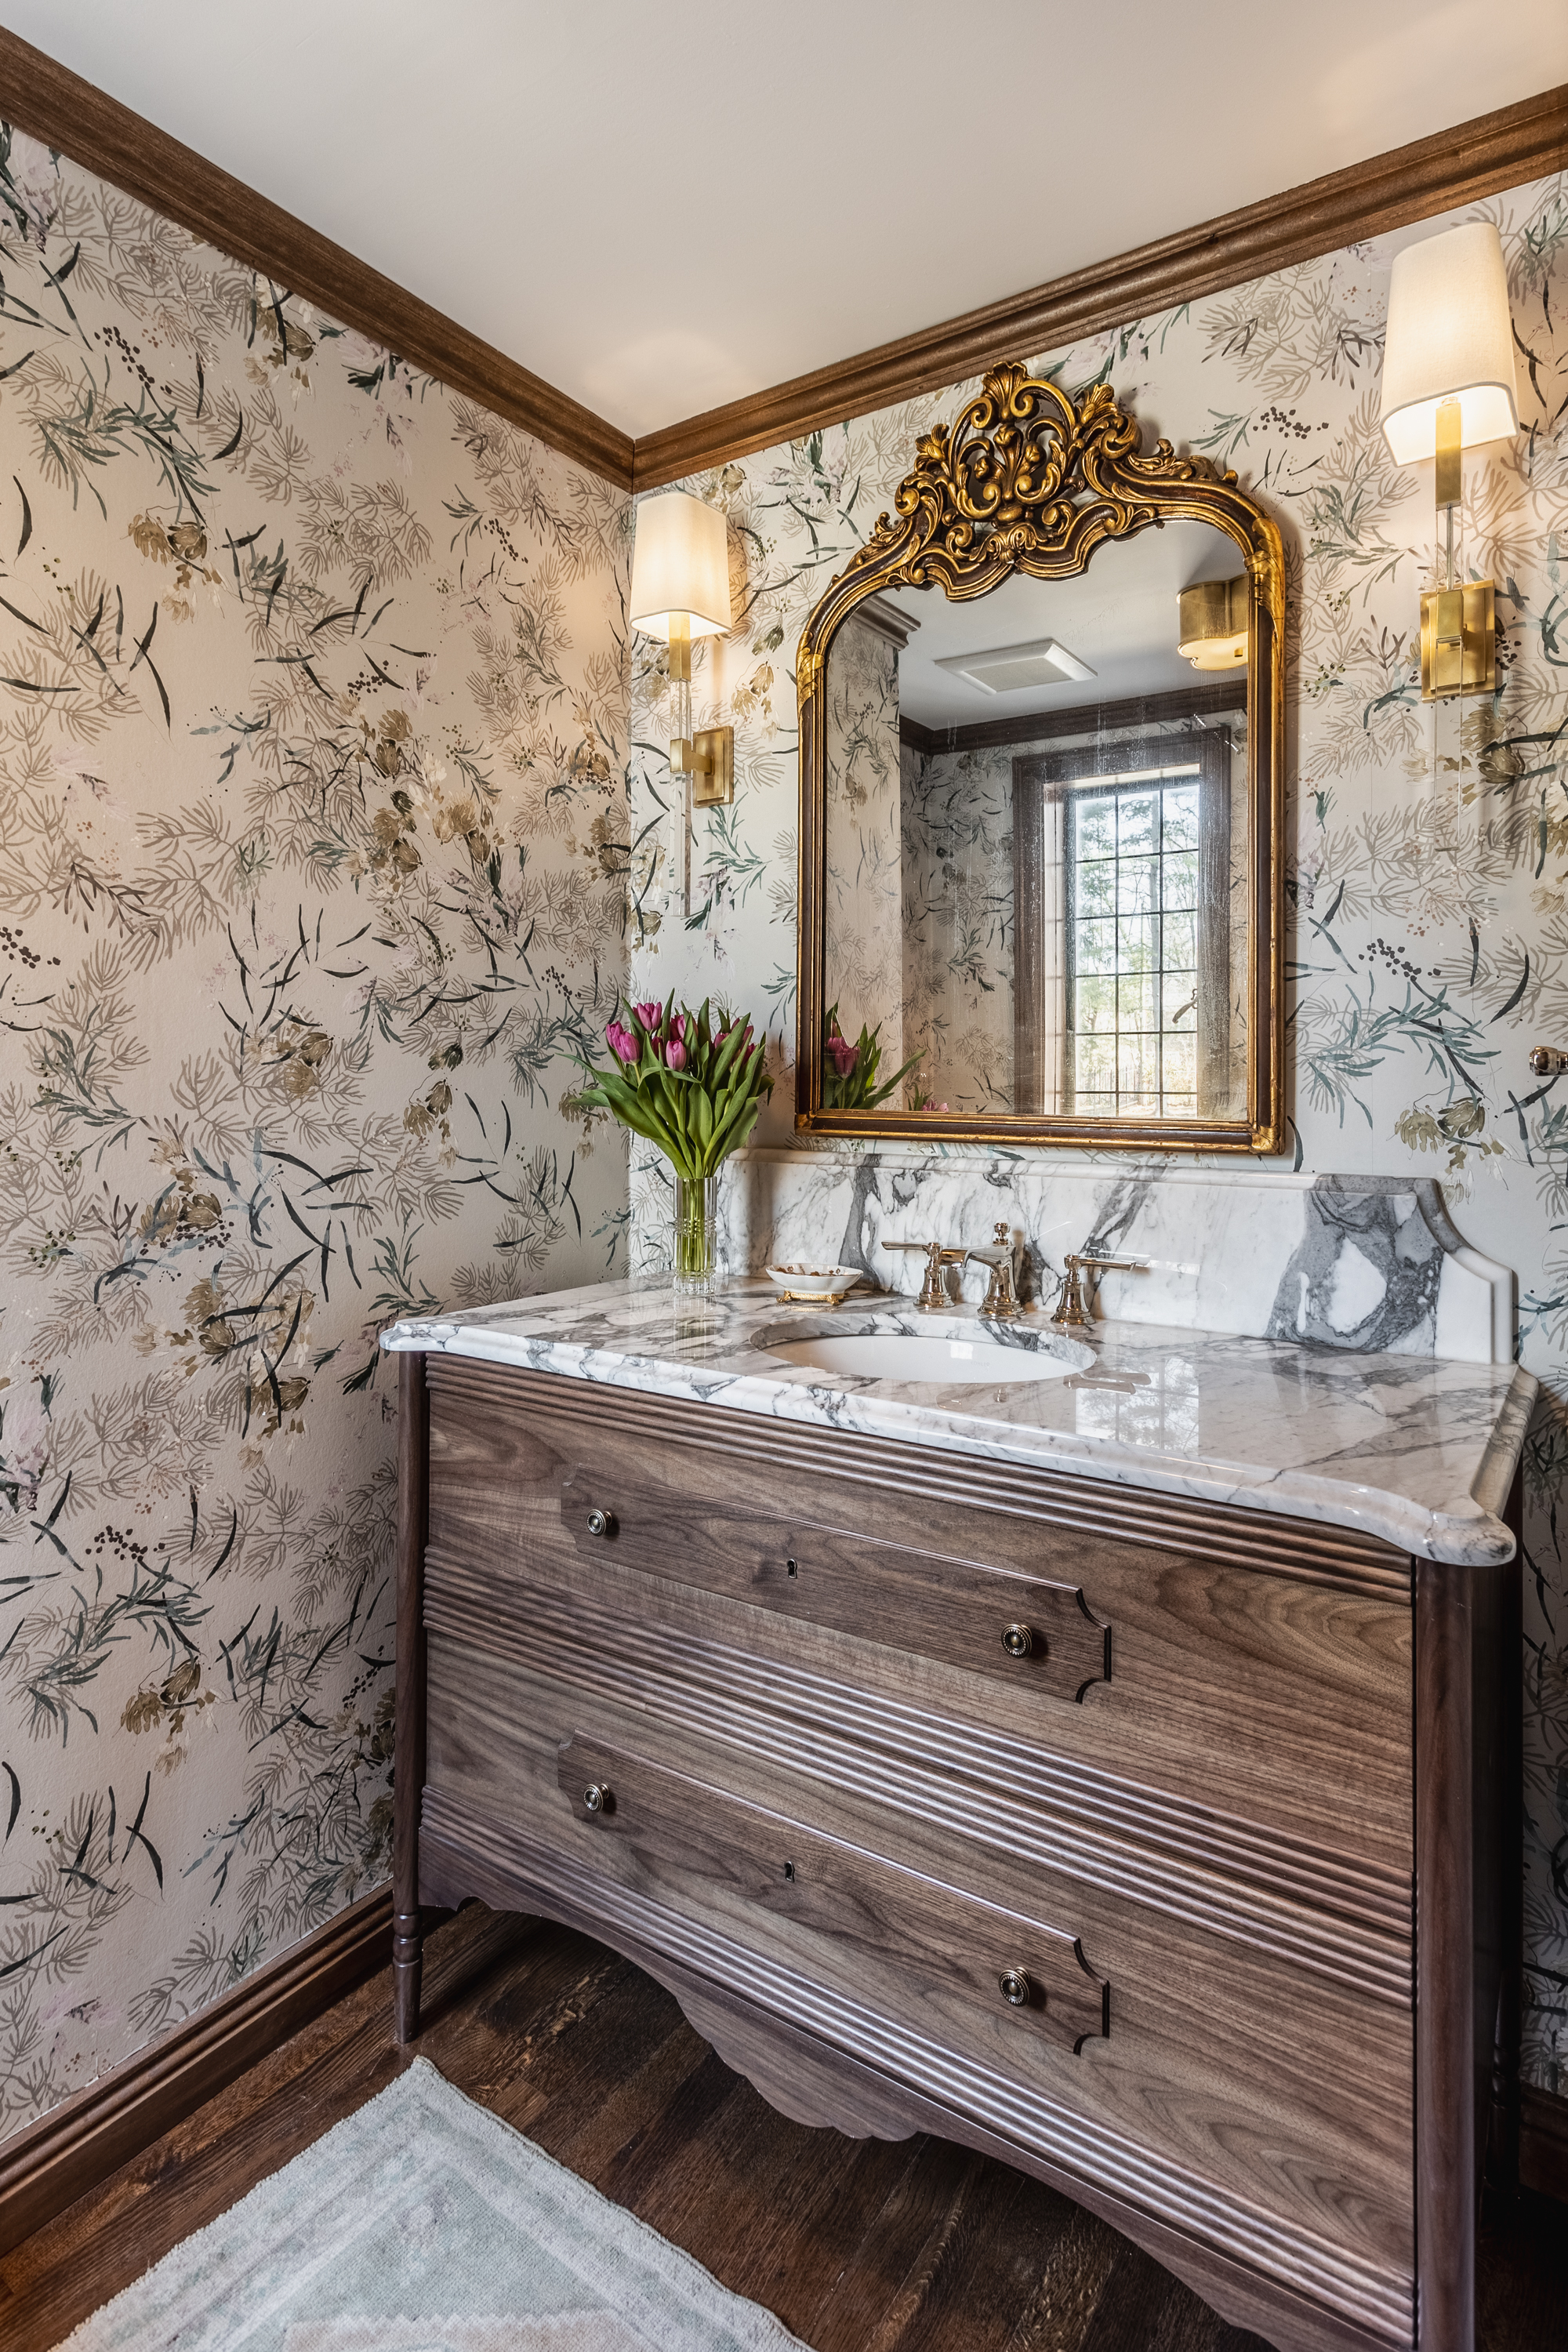 The powder room by Tiffany Skilling of Tiffany Skilling Interiors also has something of a woodland theme, thanks to the wallpaper and the vanity. Gold and polished marble, however, add sophistication. In fact, an ornate gold-frame mirror (like these) brings instant elegance to any space. (Find similar sconces here.)
